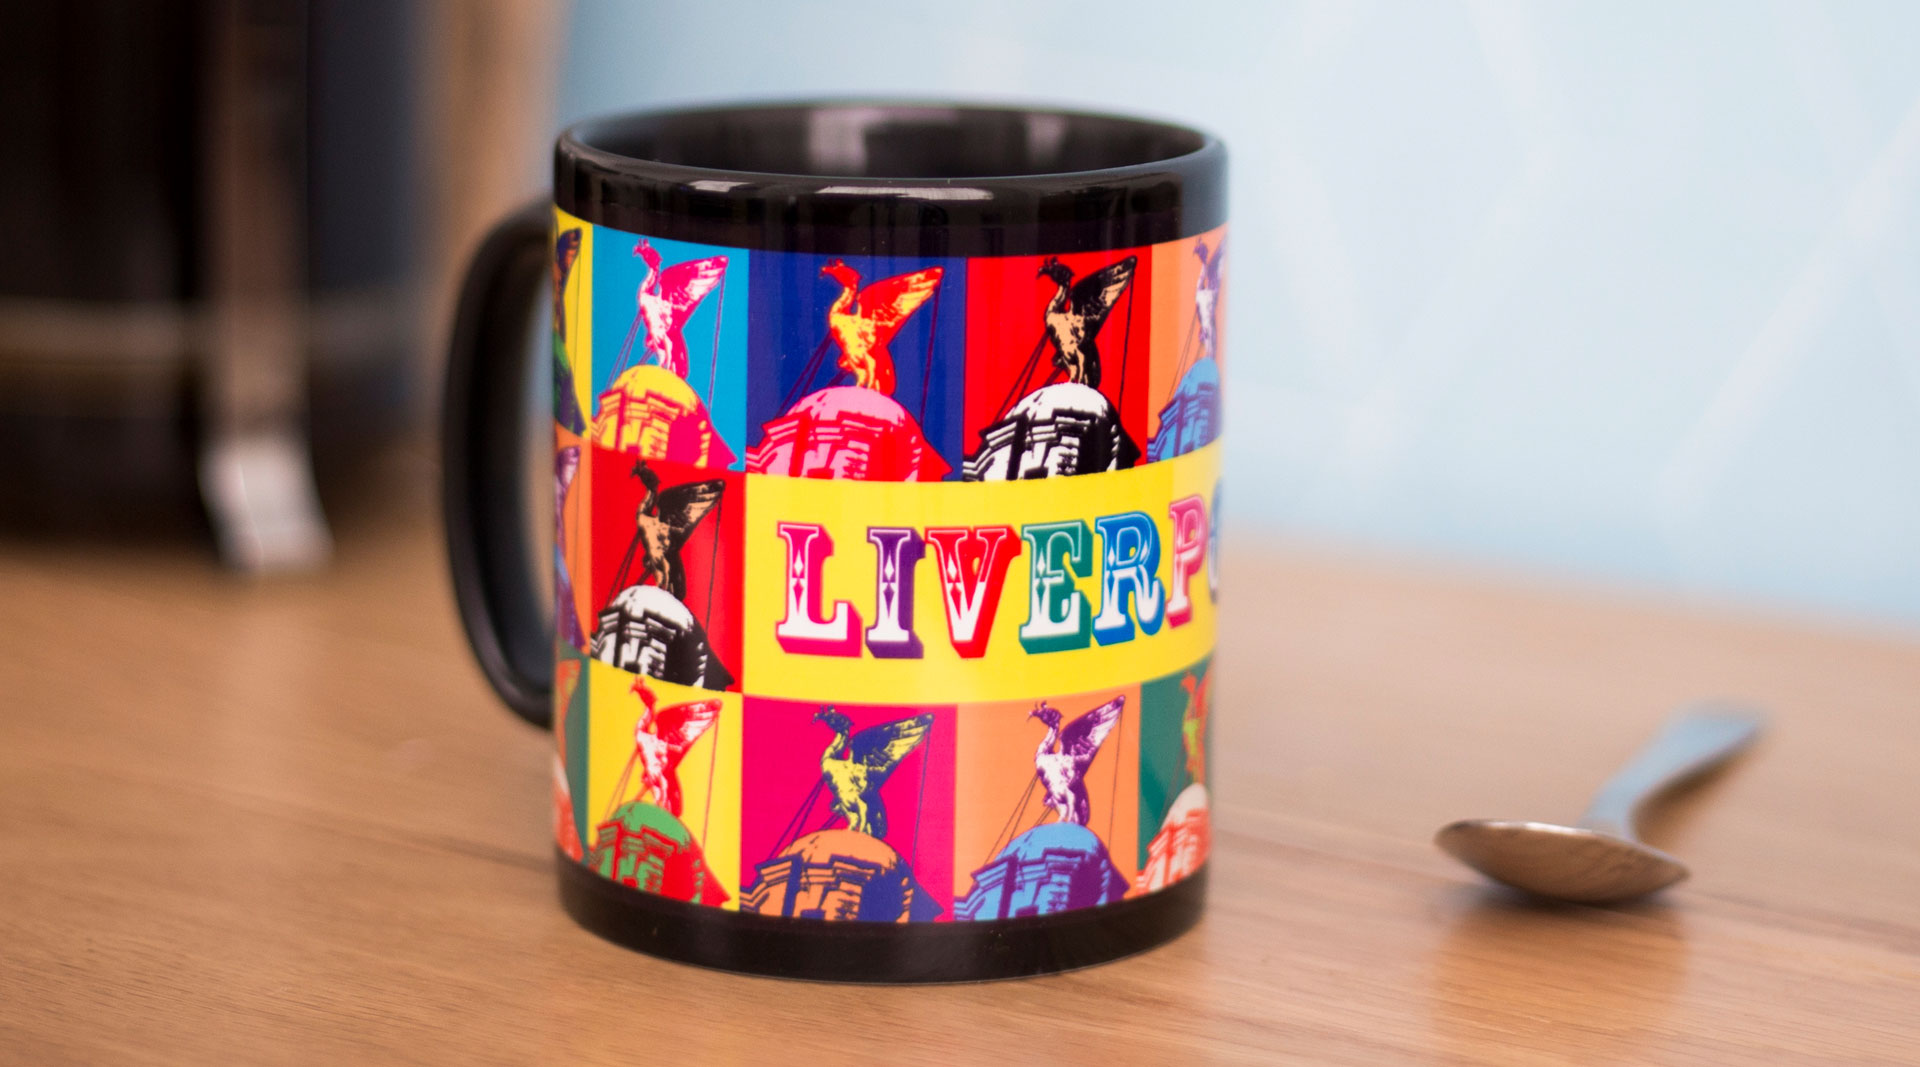 Cambridge dye-sublimation printed promotional mug from Prince William Pottery